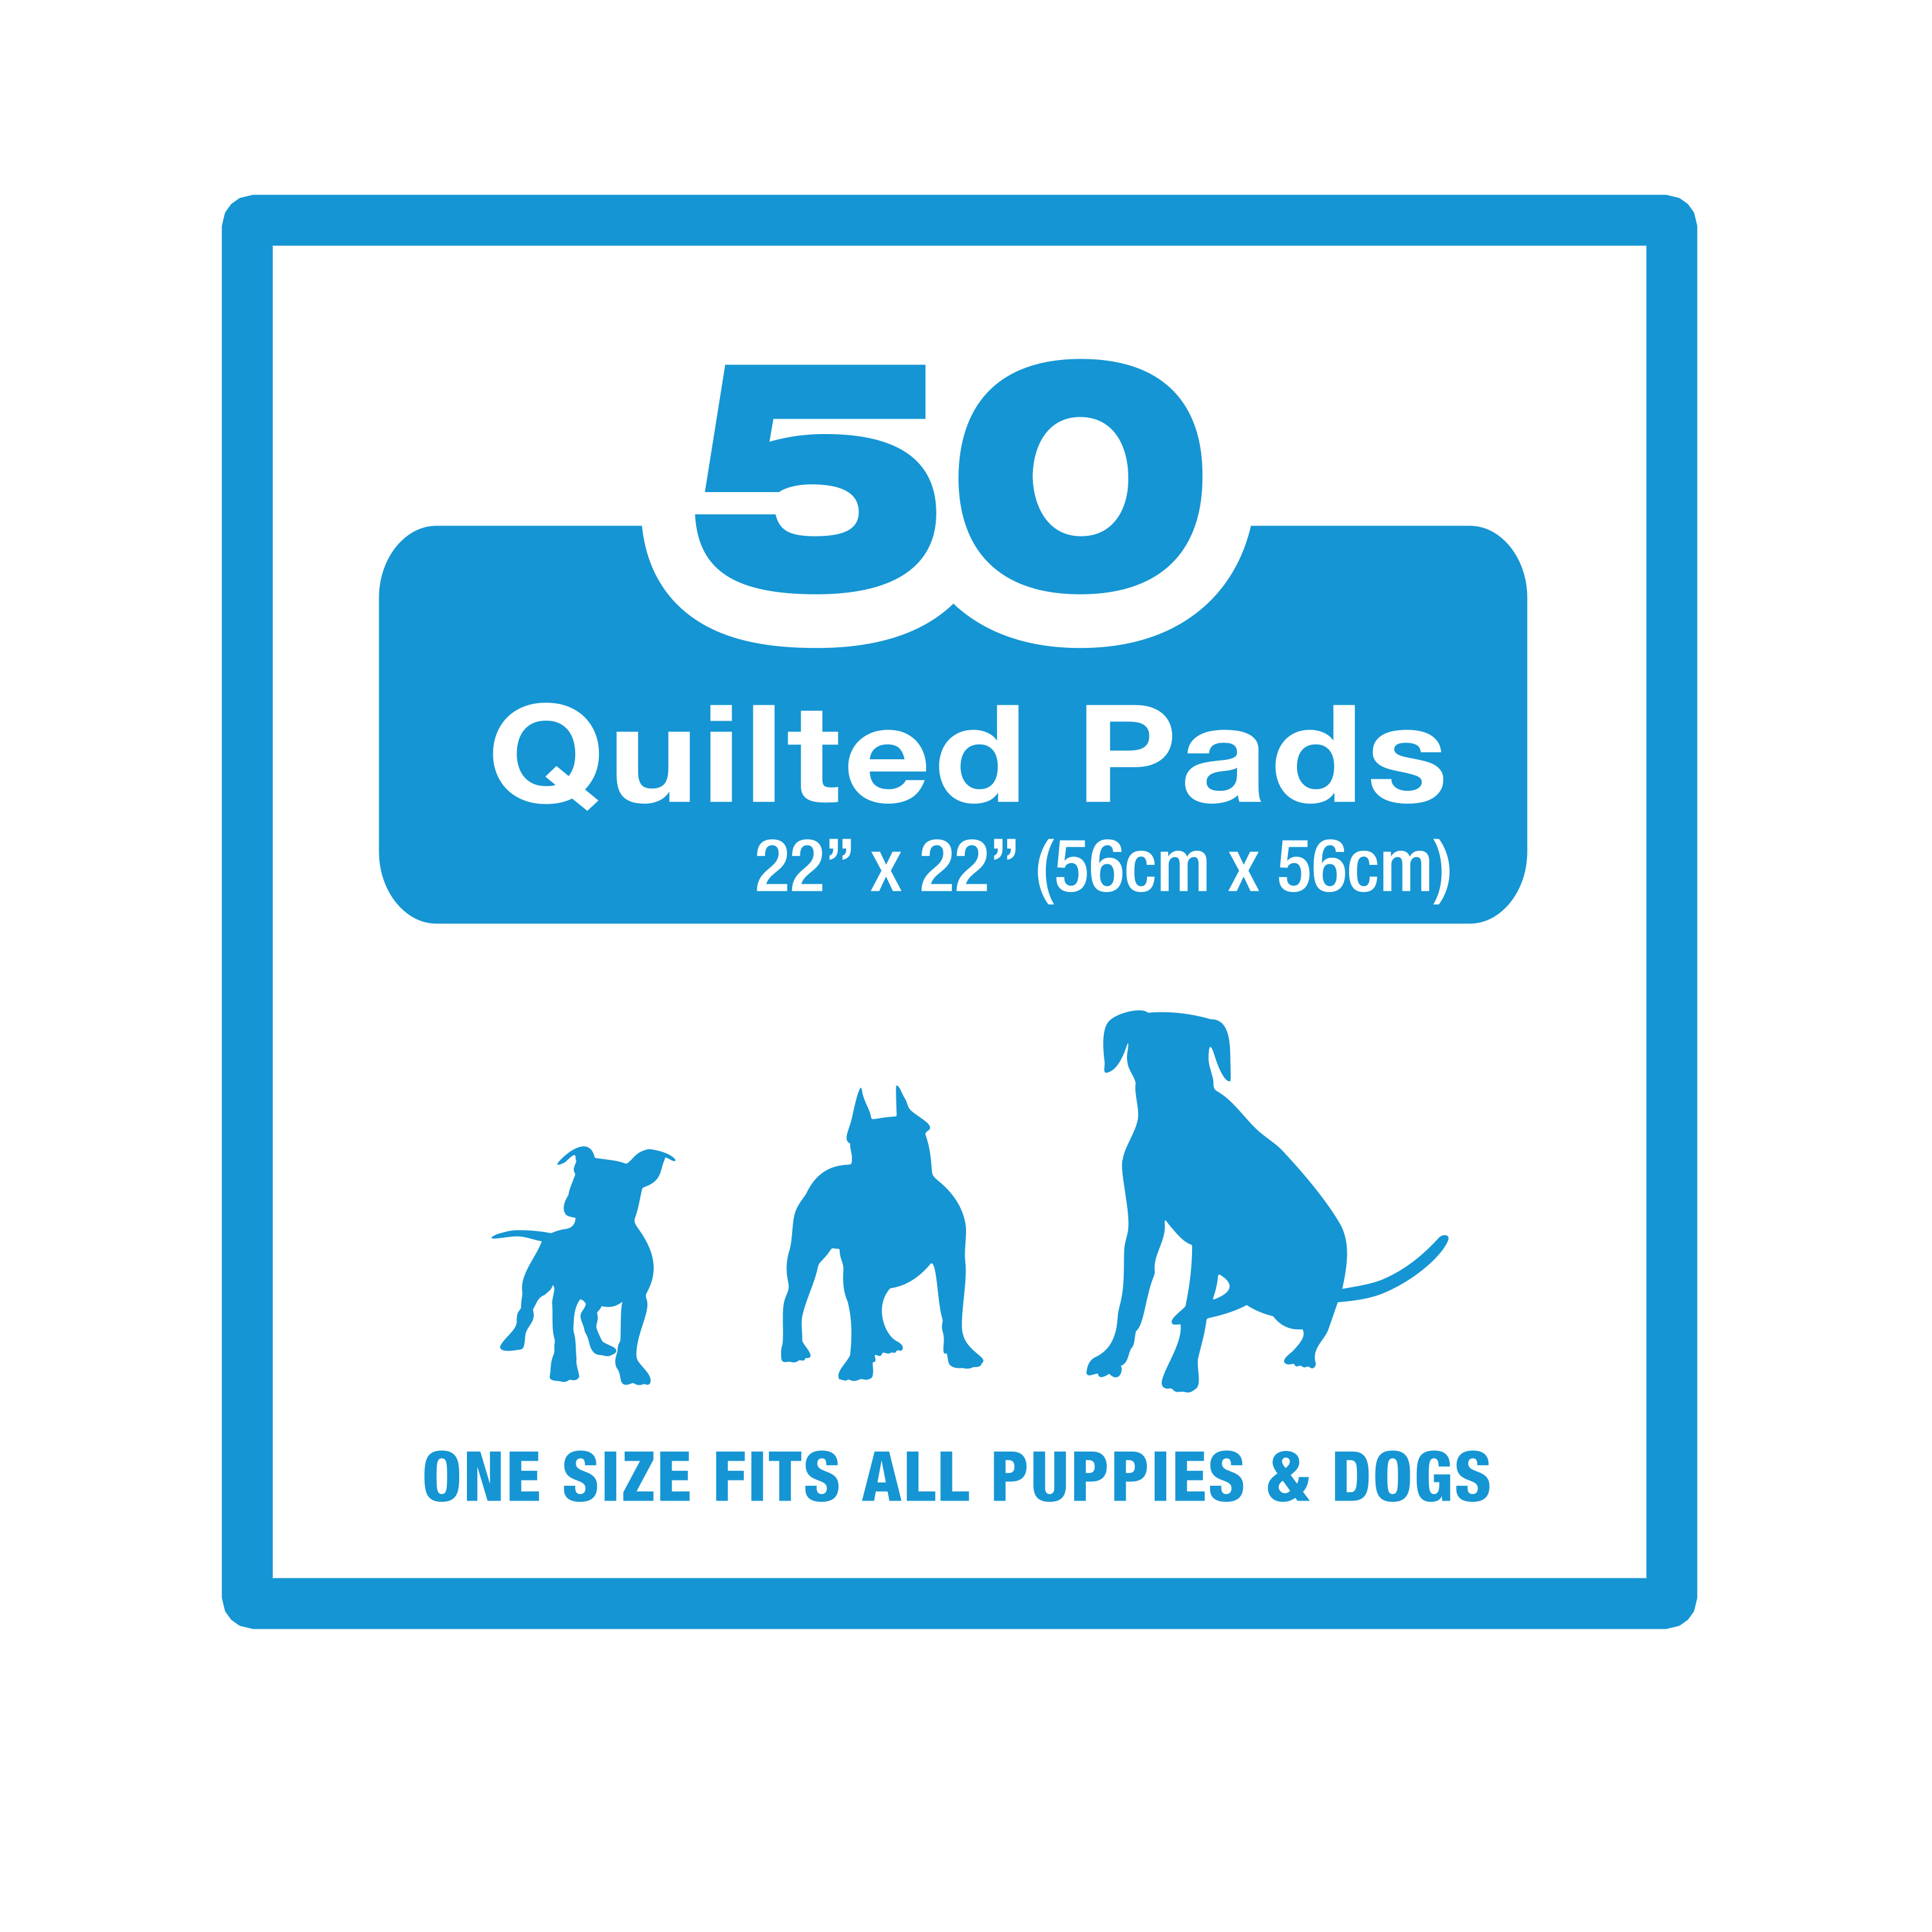 Four Paws Pet Select Pee Pee Pads for Dogs and Puppies 50 Count Standard 22" x 23" - image 3 of 8